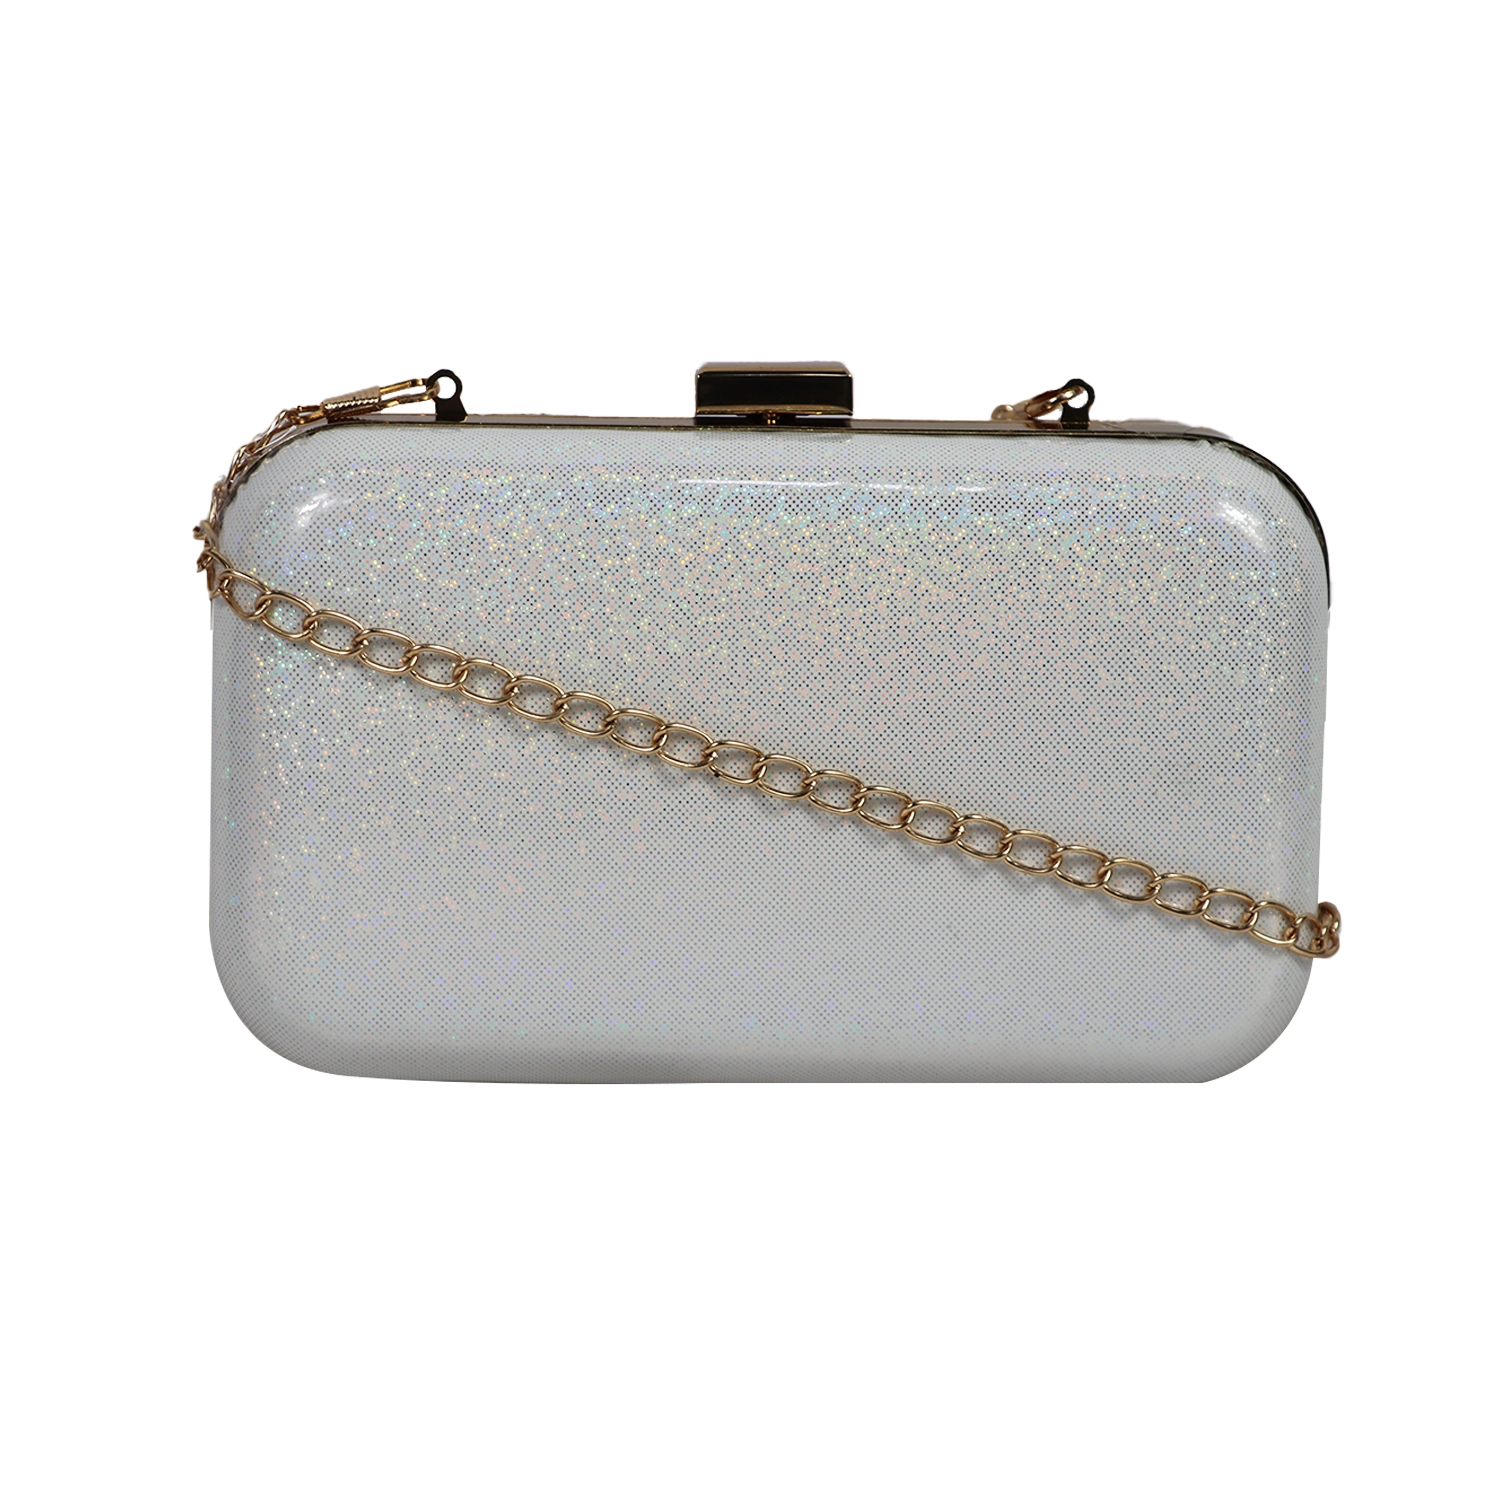 Cream Shimmer Box Clutch with Chain Strap